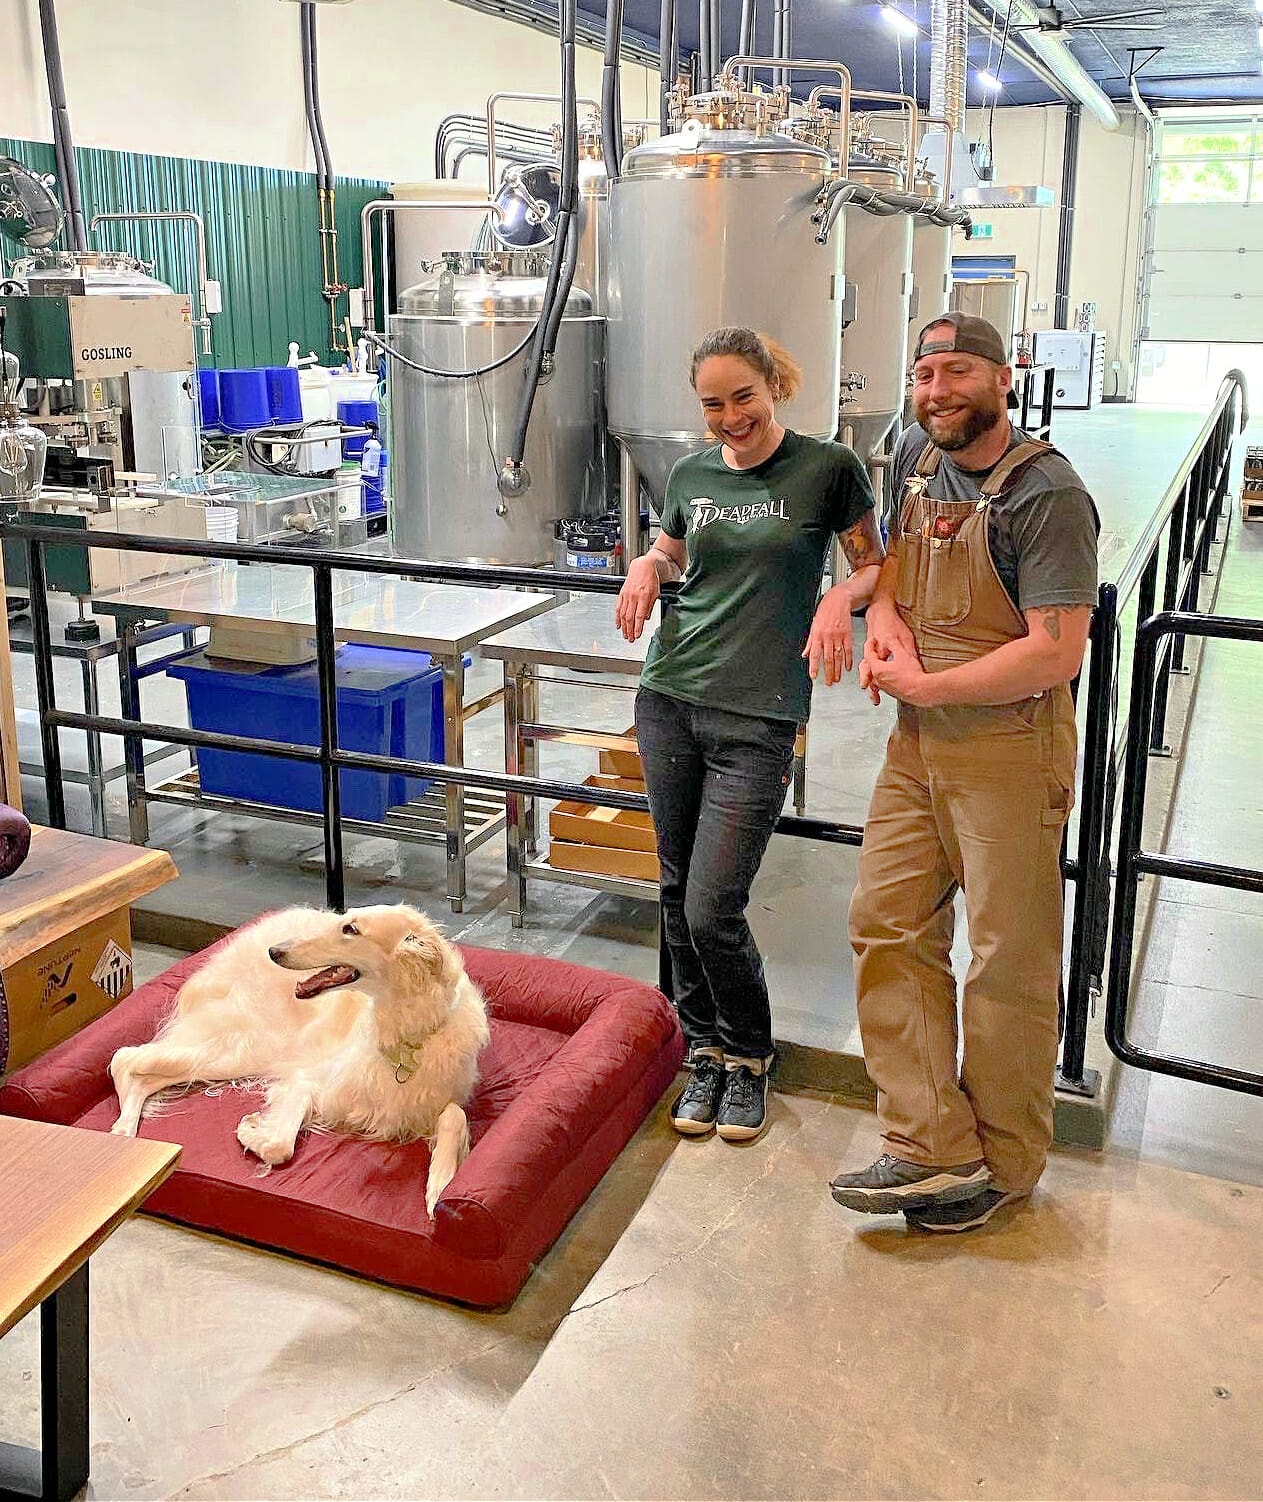 co-owners Erin and Brandon with their dog in front of the brewery at Erin Baerwald of Deadfall Brewing Company